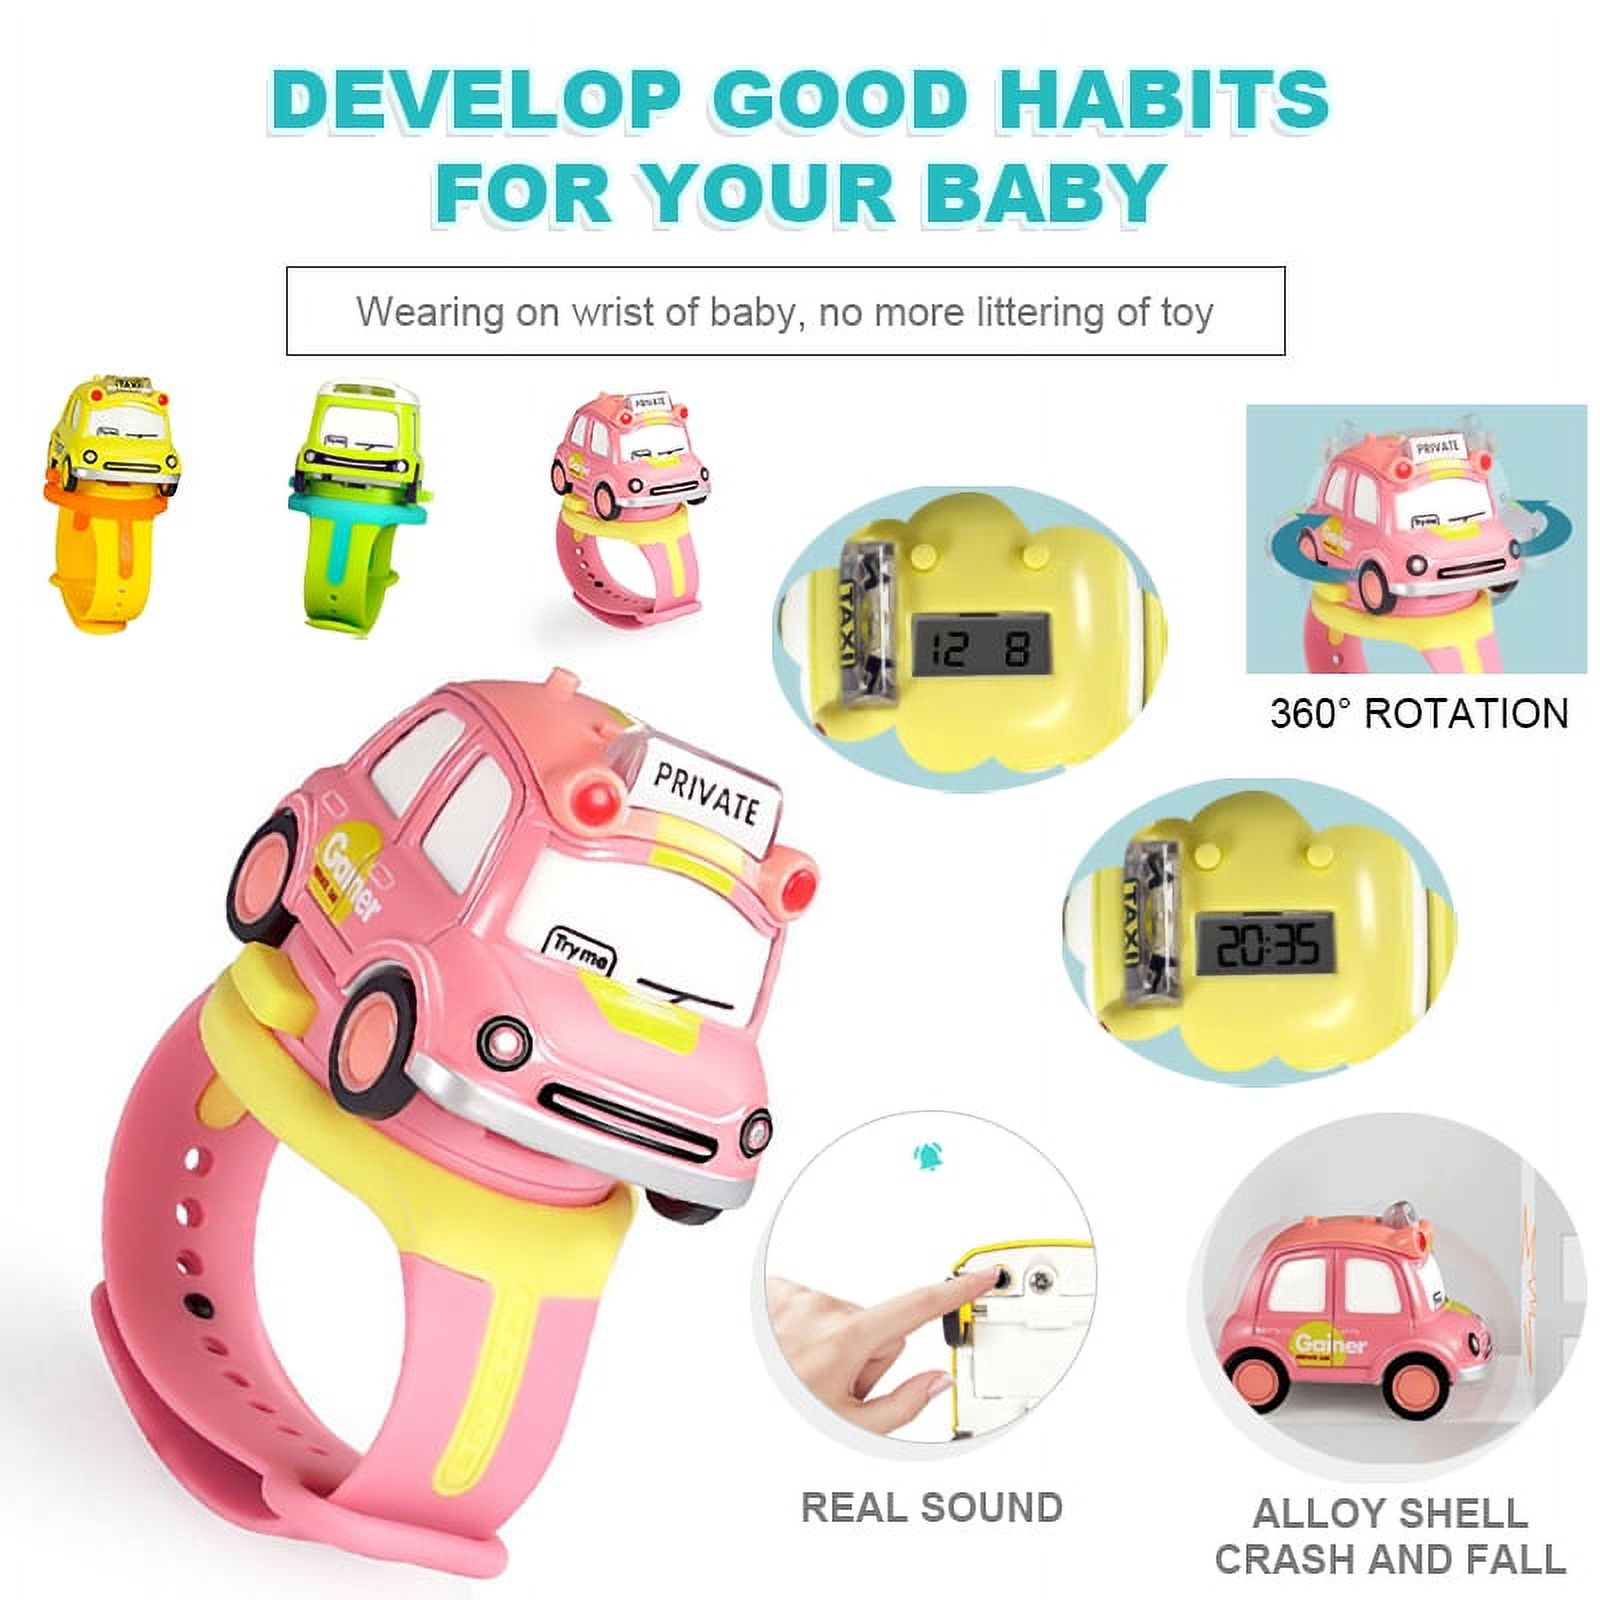 LNKOO 2 in 1 Pull Back car toy Wrist Watch Creative Children Watch Electronic Watch Kid Educational Toys Digital Watches Kids Boy Girl Clock For 3 4 5 6 7 Year Old Boys Girls - image 1 of 6